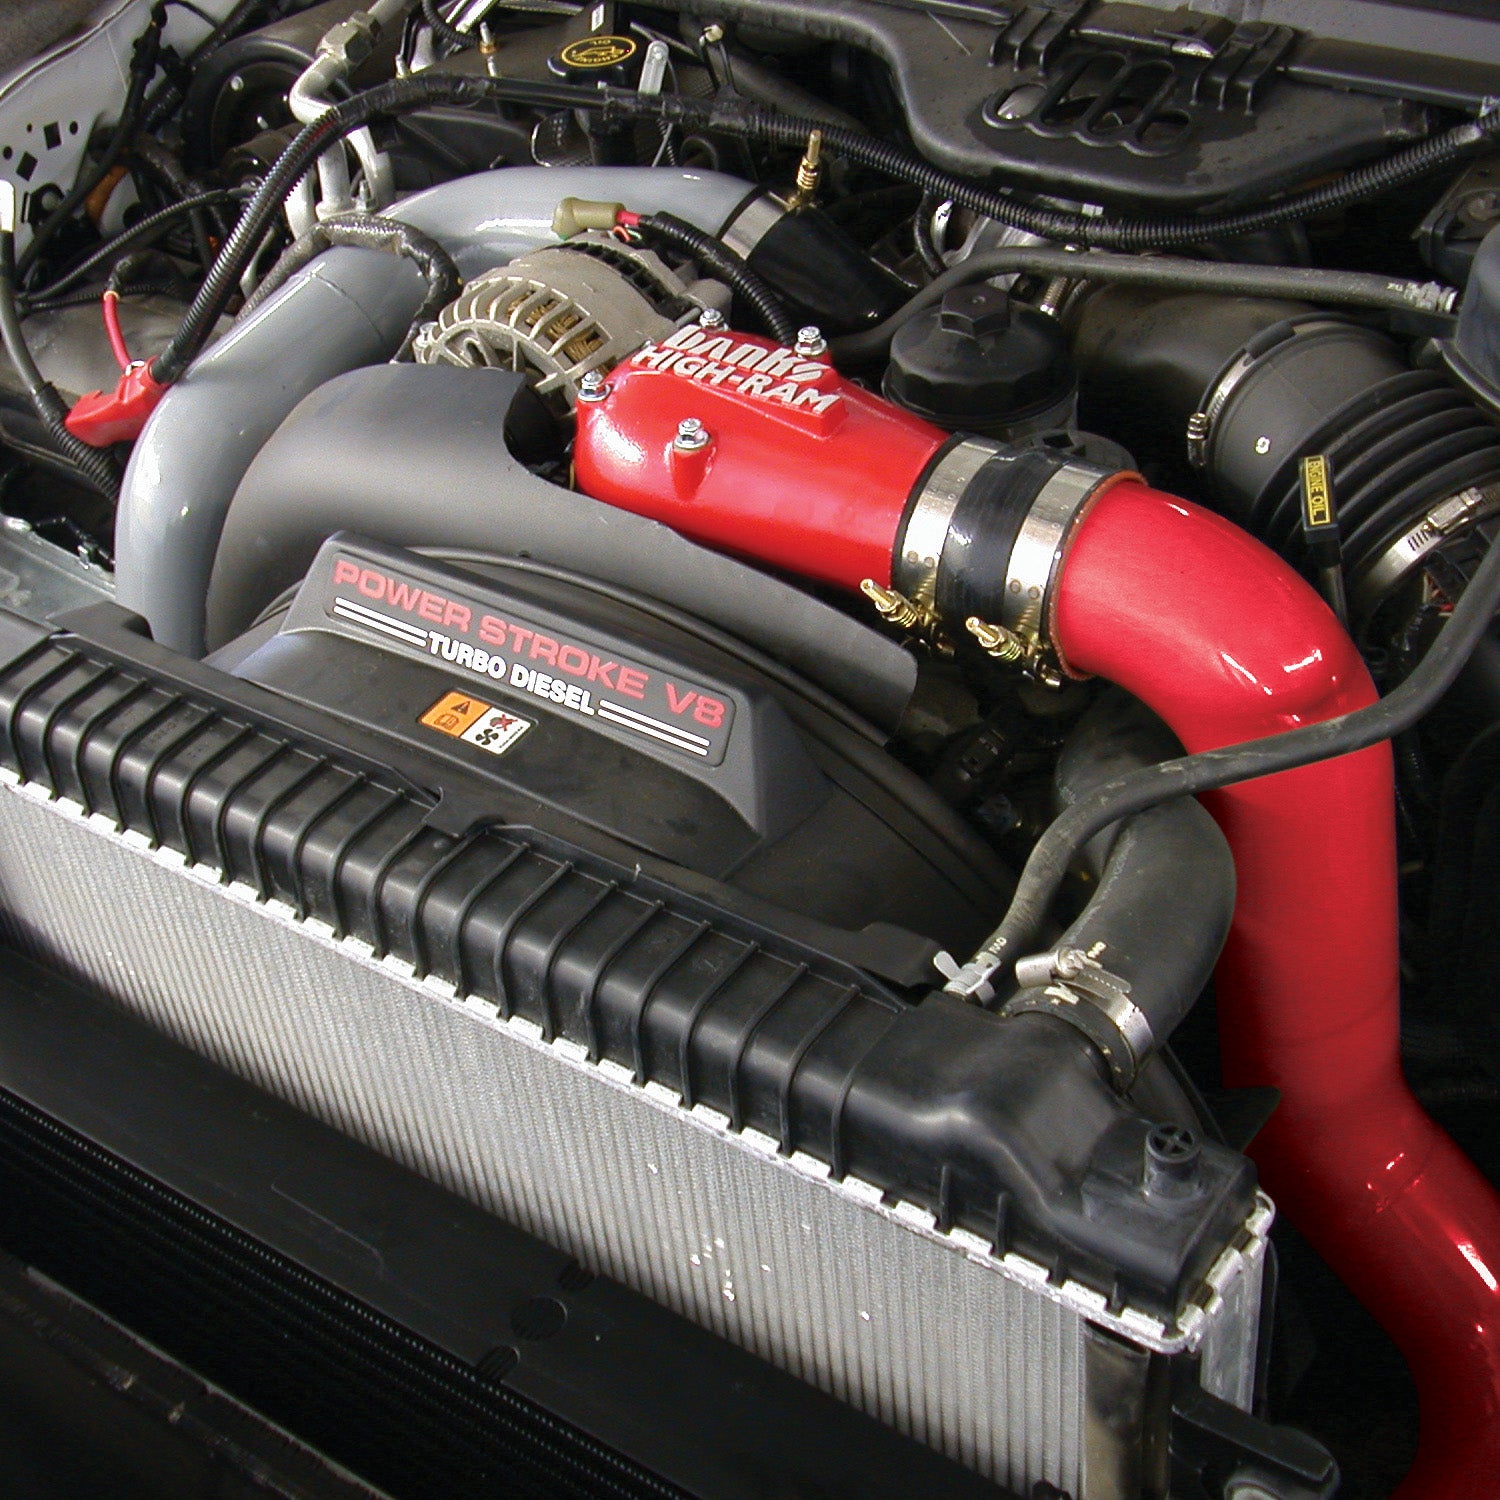 Banks High-Ram intake installed on a Ford 6.0L Powerstroke 42750